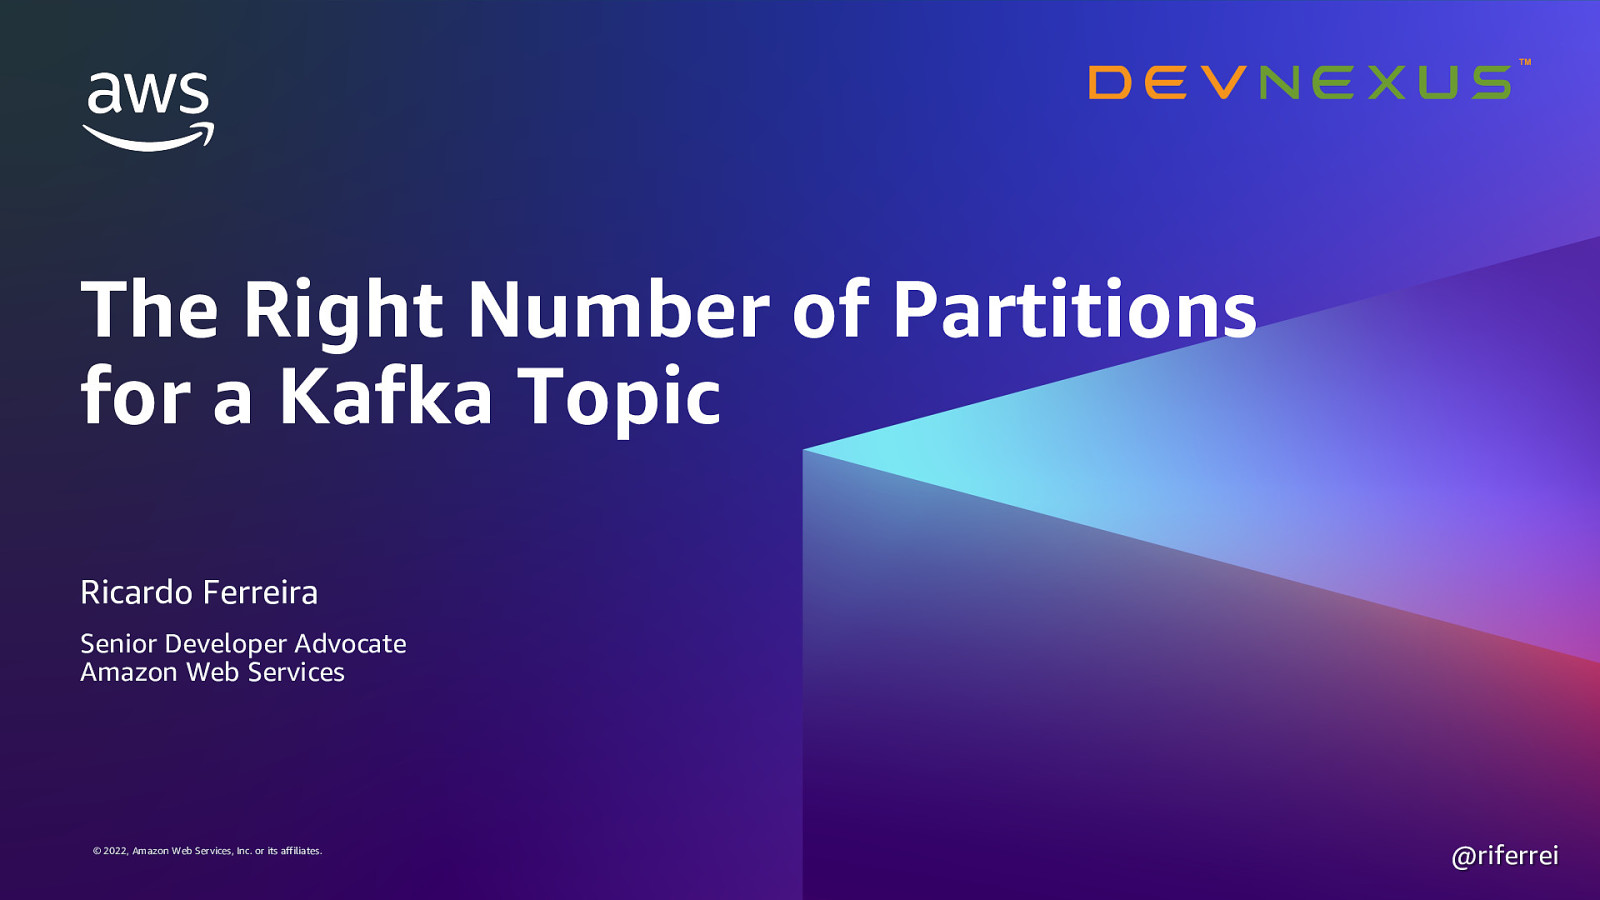 The Right Number of Partitions for a Kafka Topic